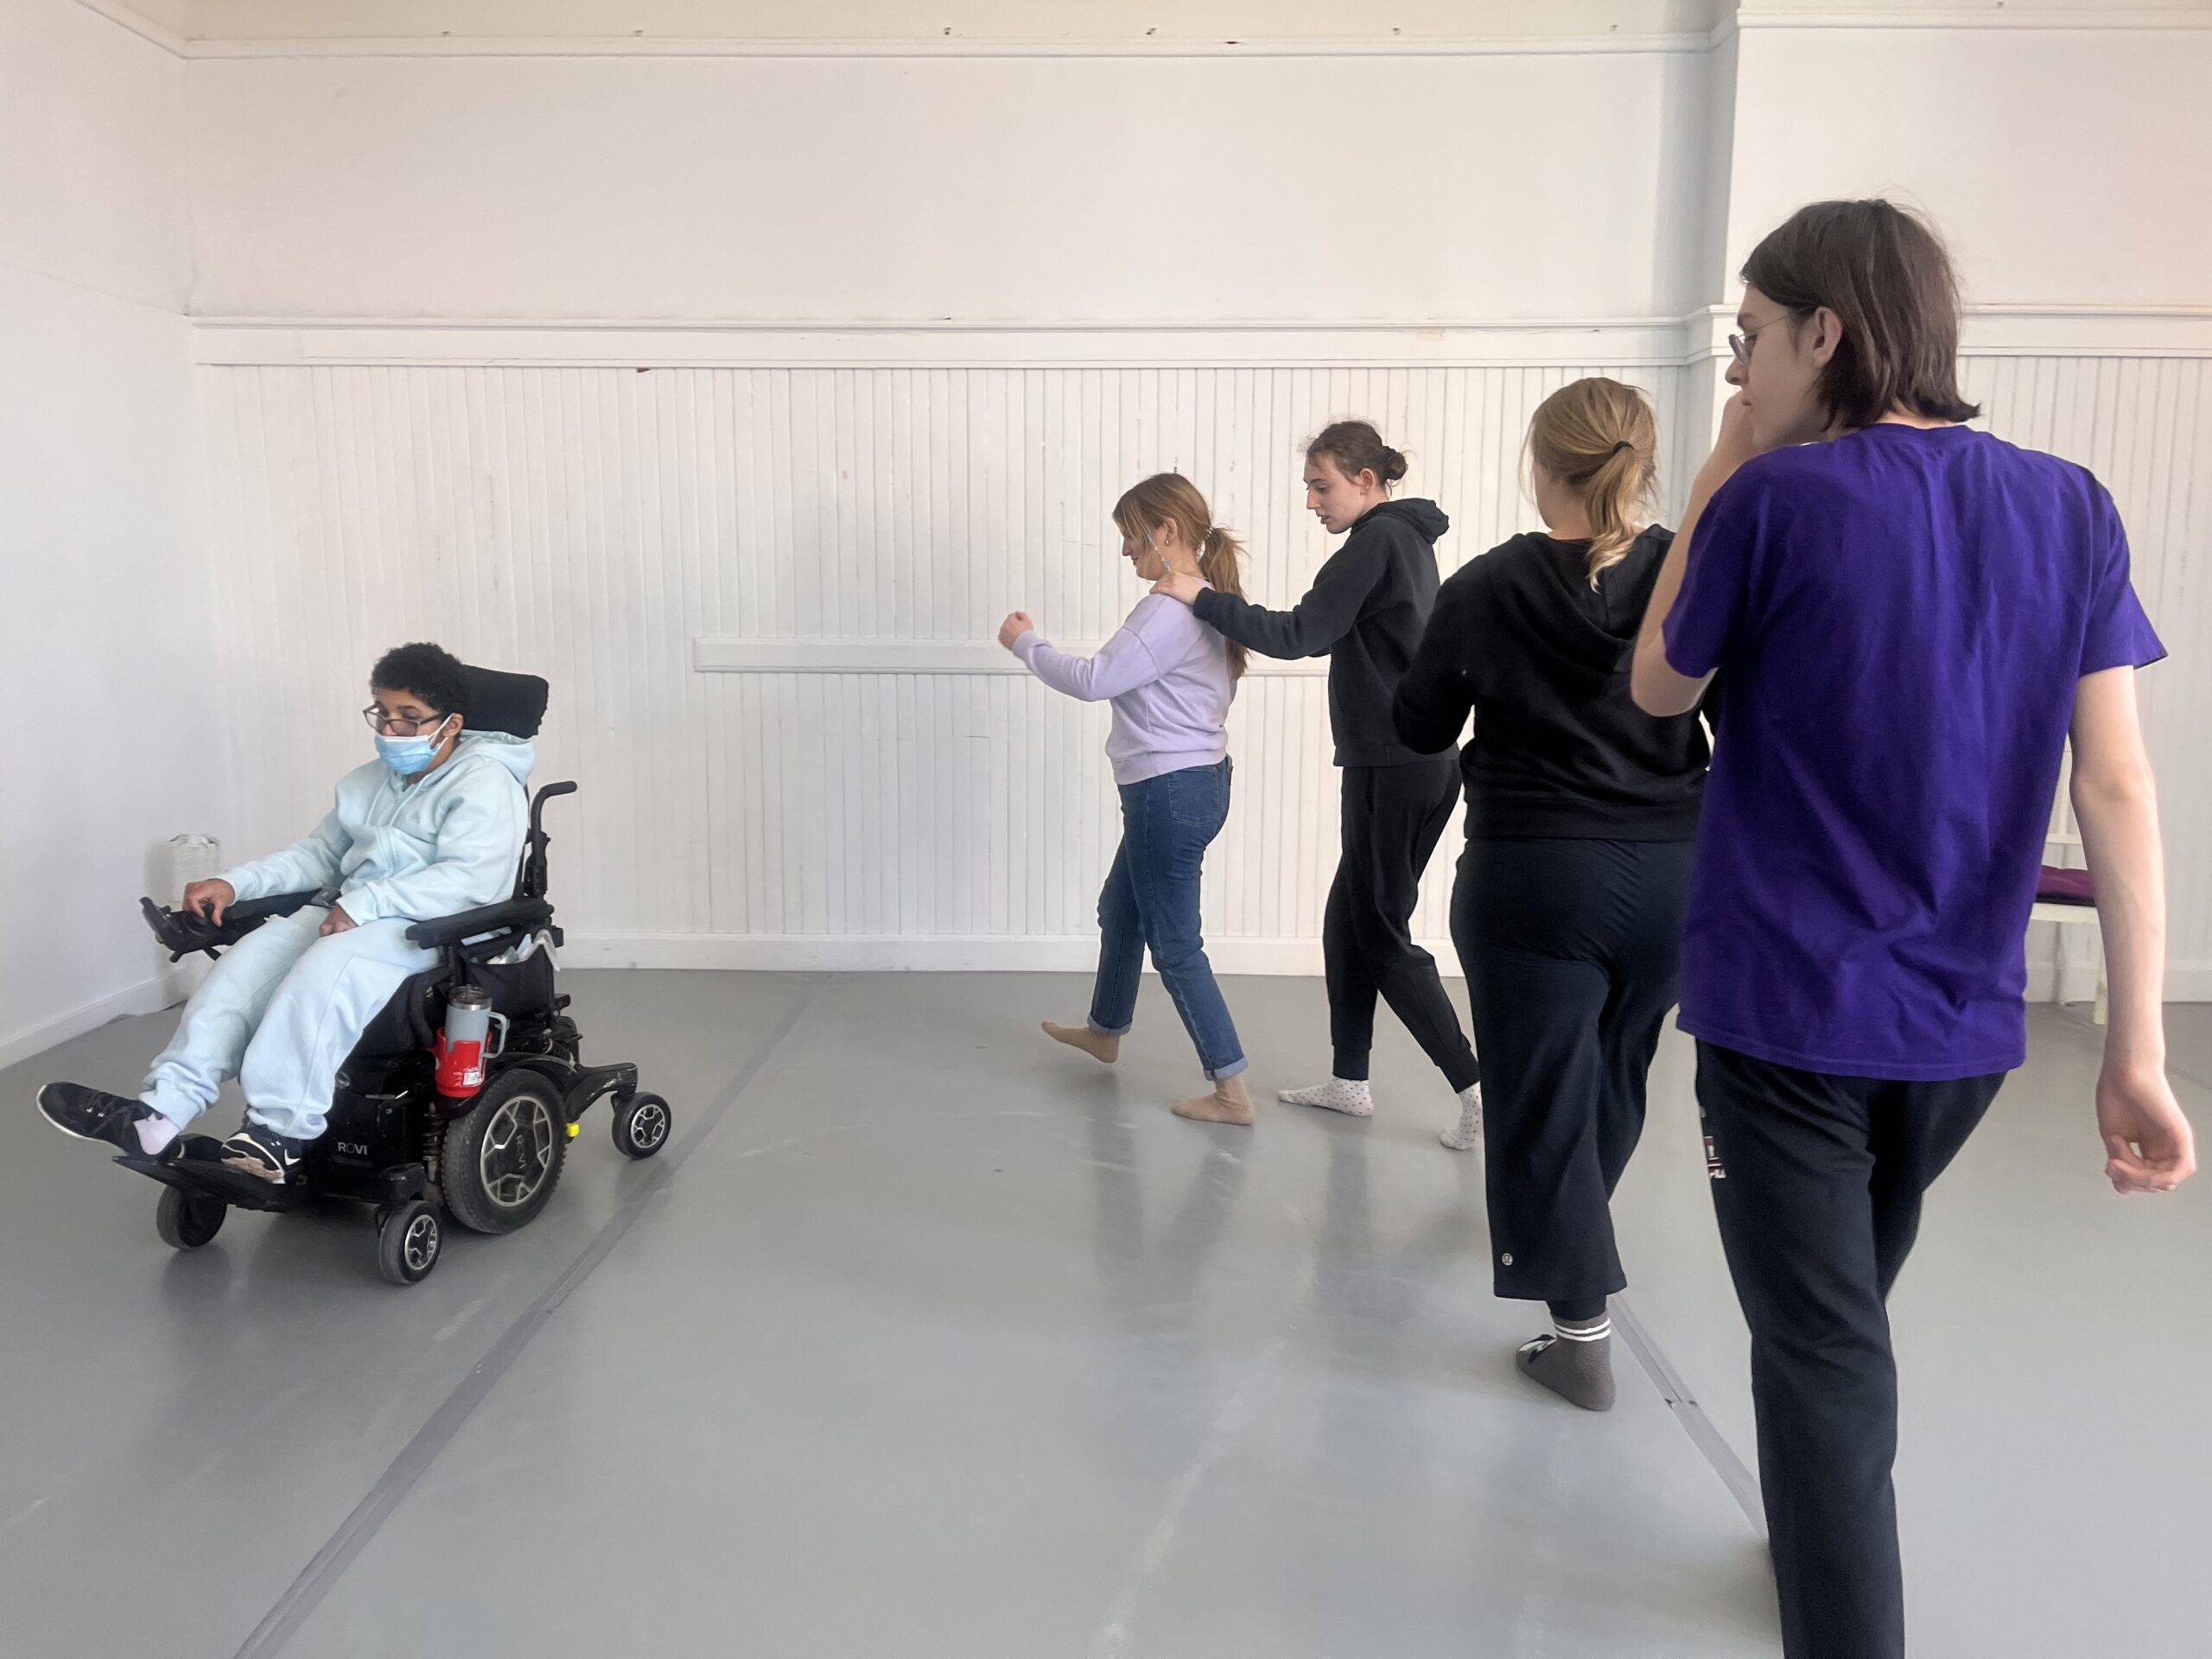 a group of people in a room with one person in a wheelchair leading a line